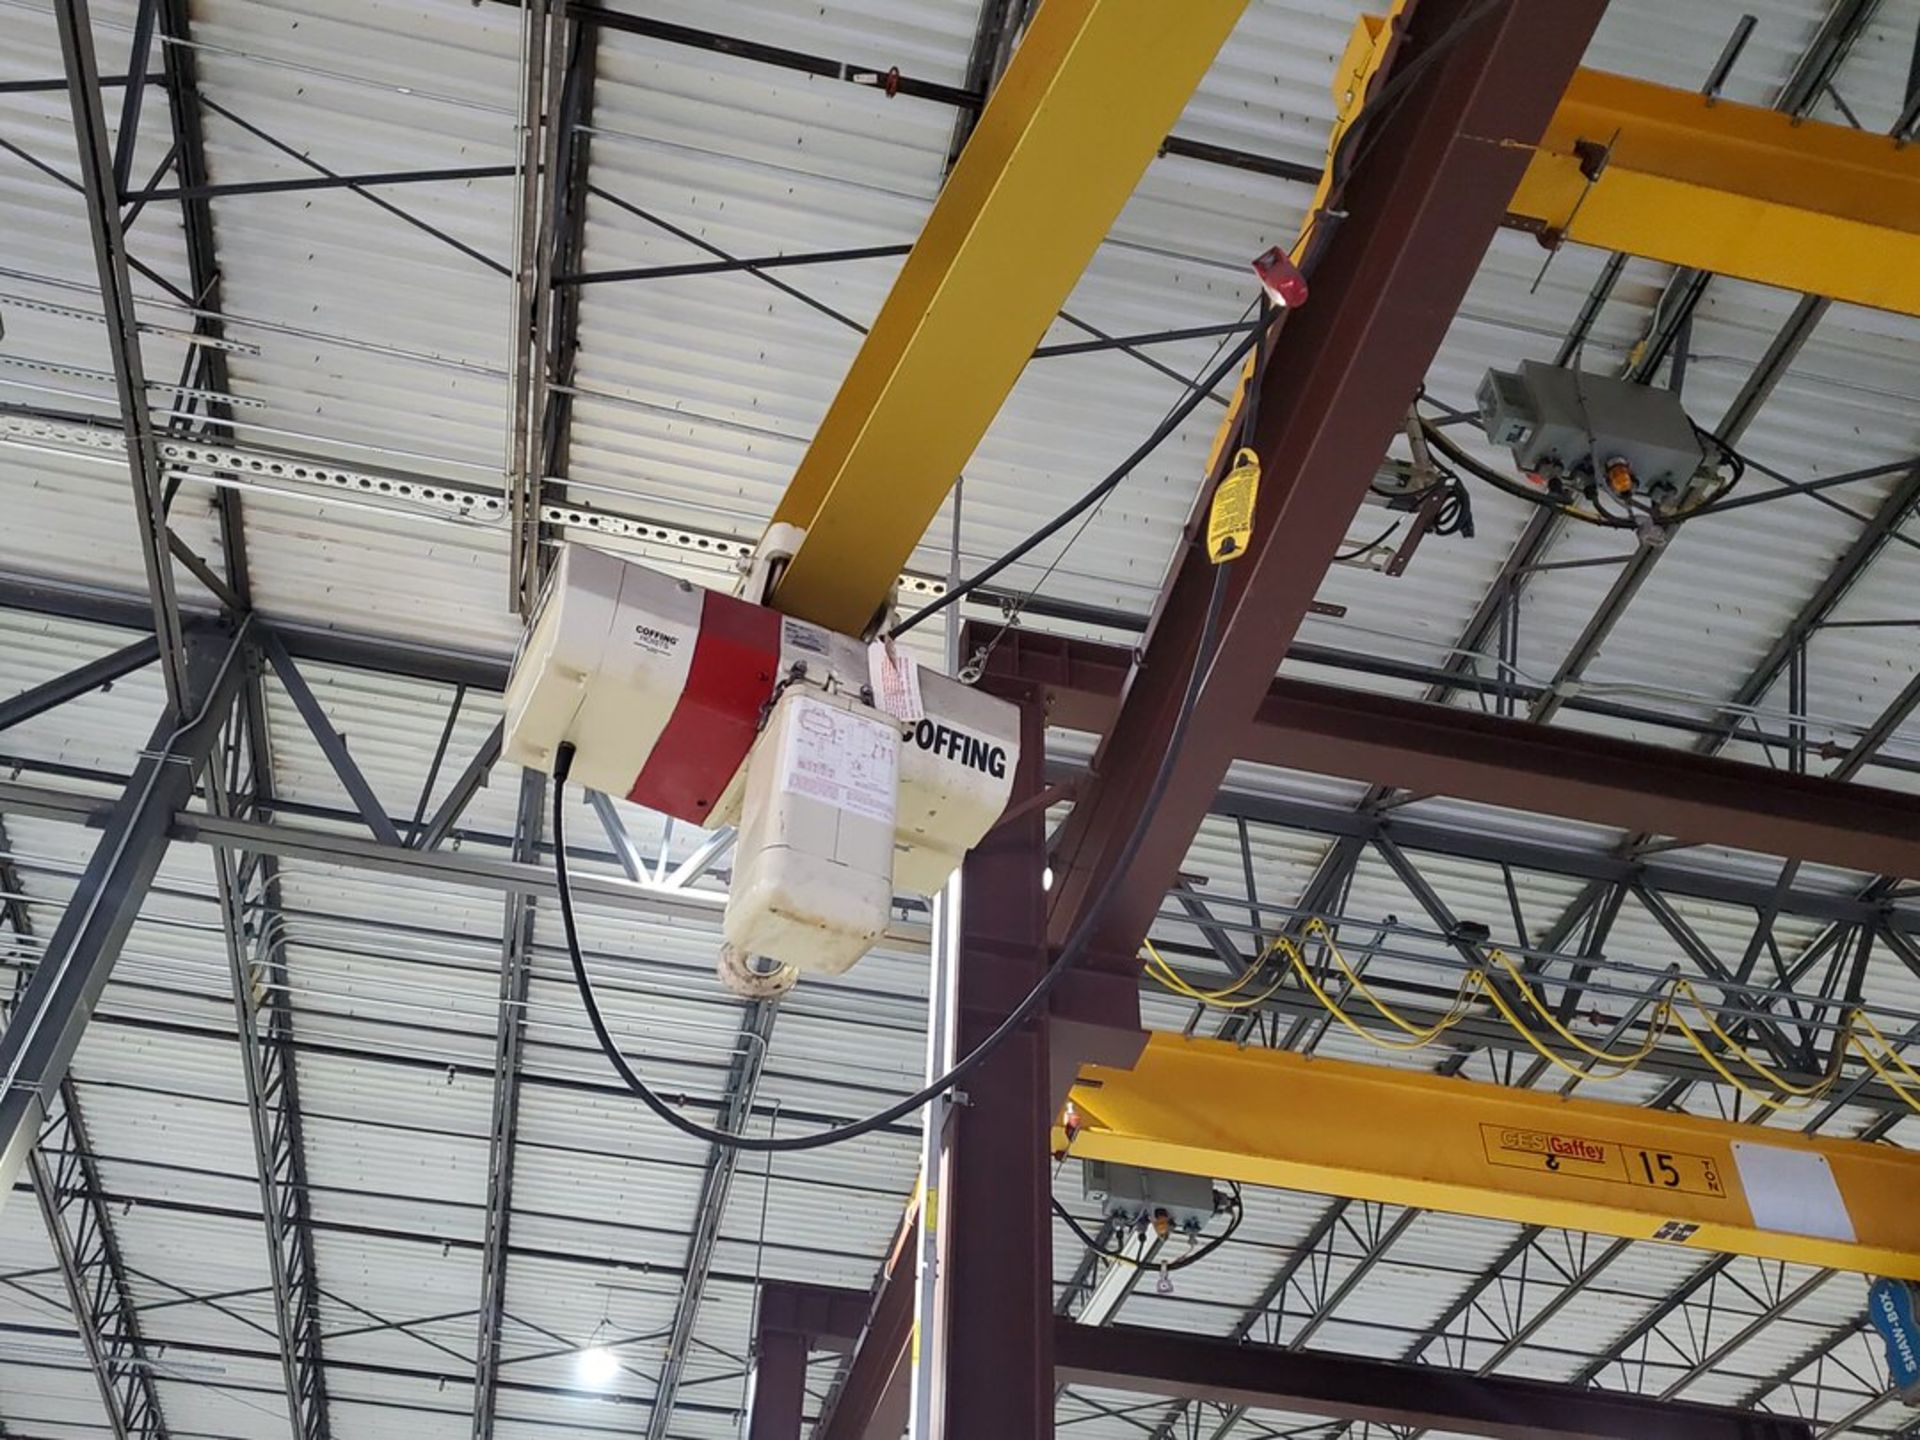 Abbell Howe Wall Mounted 2 Ton Jib Crane 12' Arm, W/ 2-Ton Coffing Hoist & 2-Button Pendant - Image 9 of 10